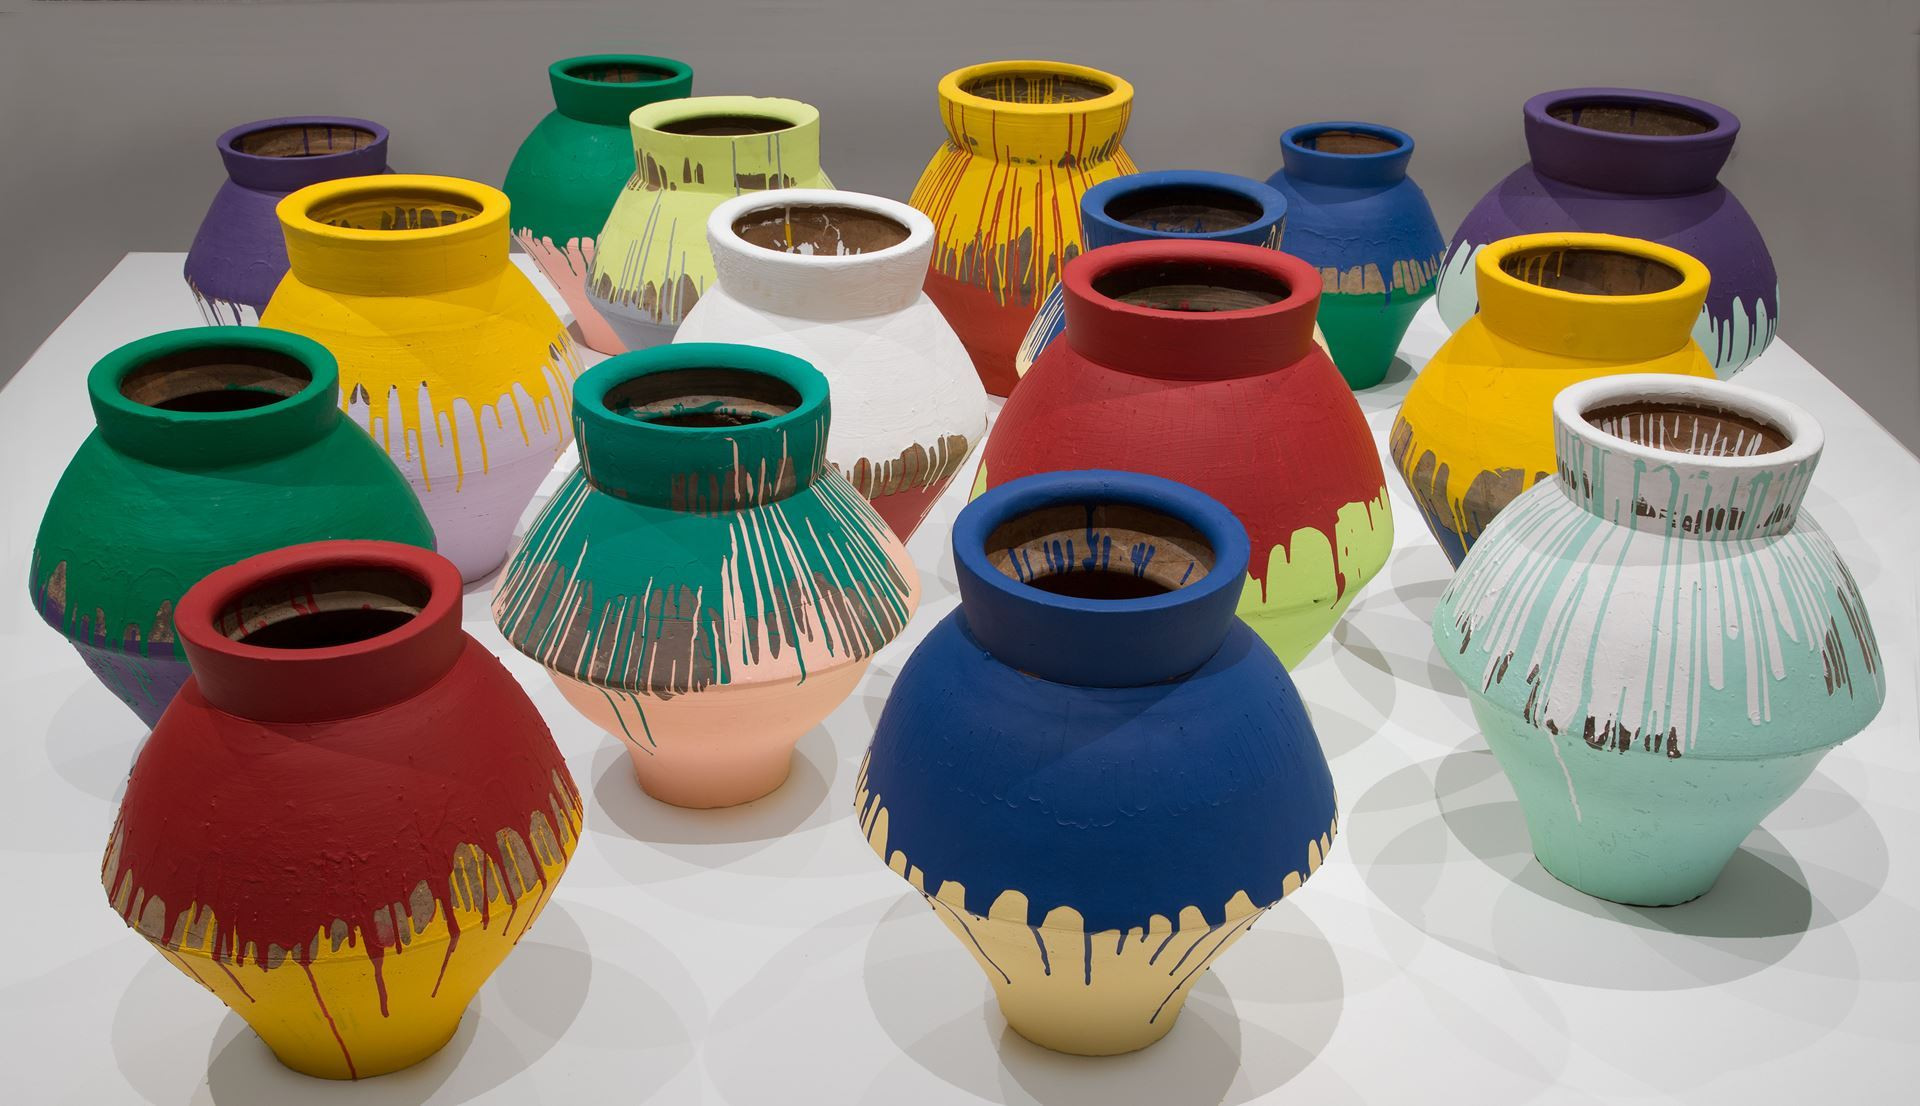 an empty vase boerne of clayhouston july newsletter 2017 intended for han dynasty vases and industrial paint dimensions variable courtesy of ai weiwei studio installation view of ai weiwei according to what